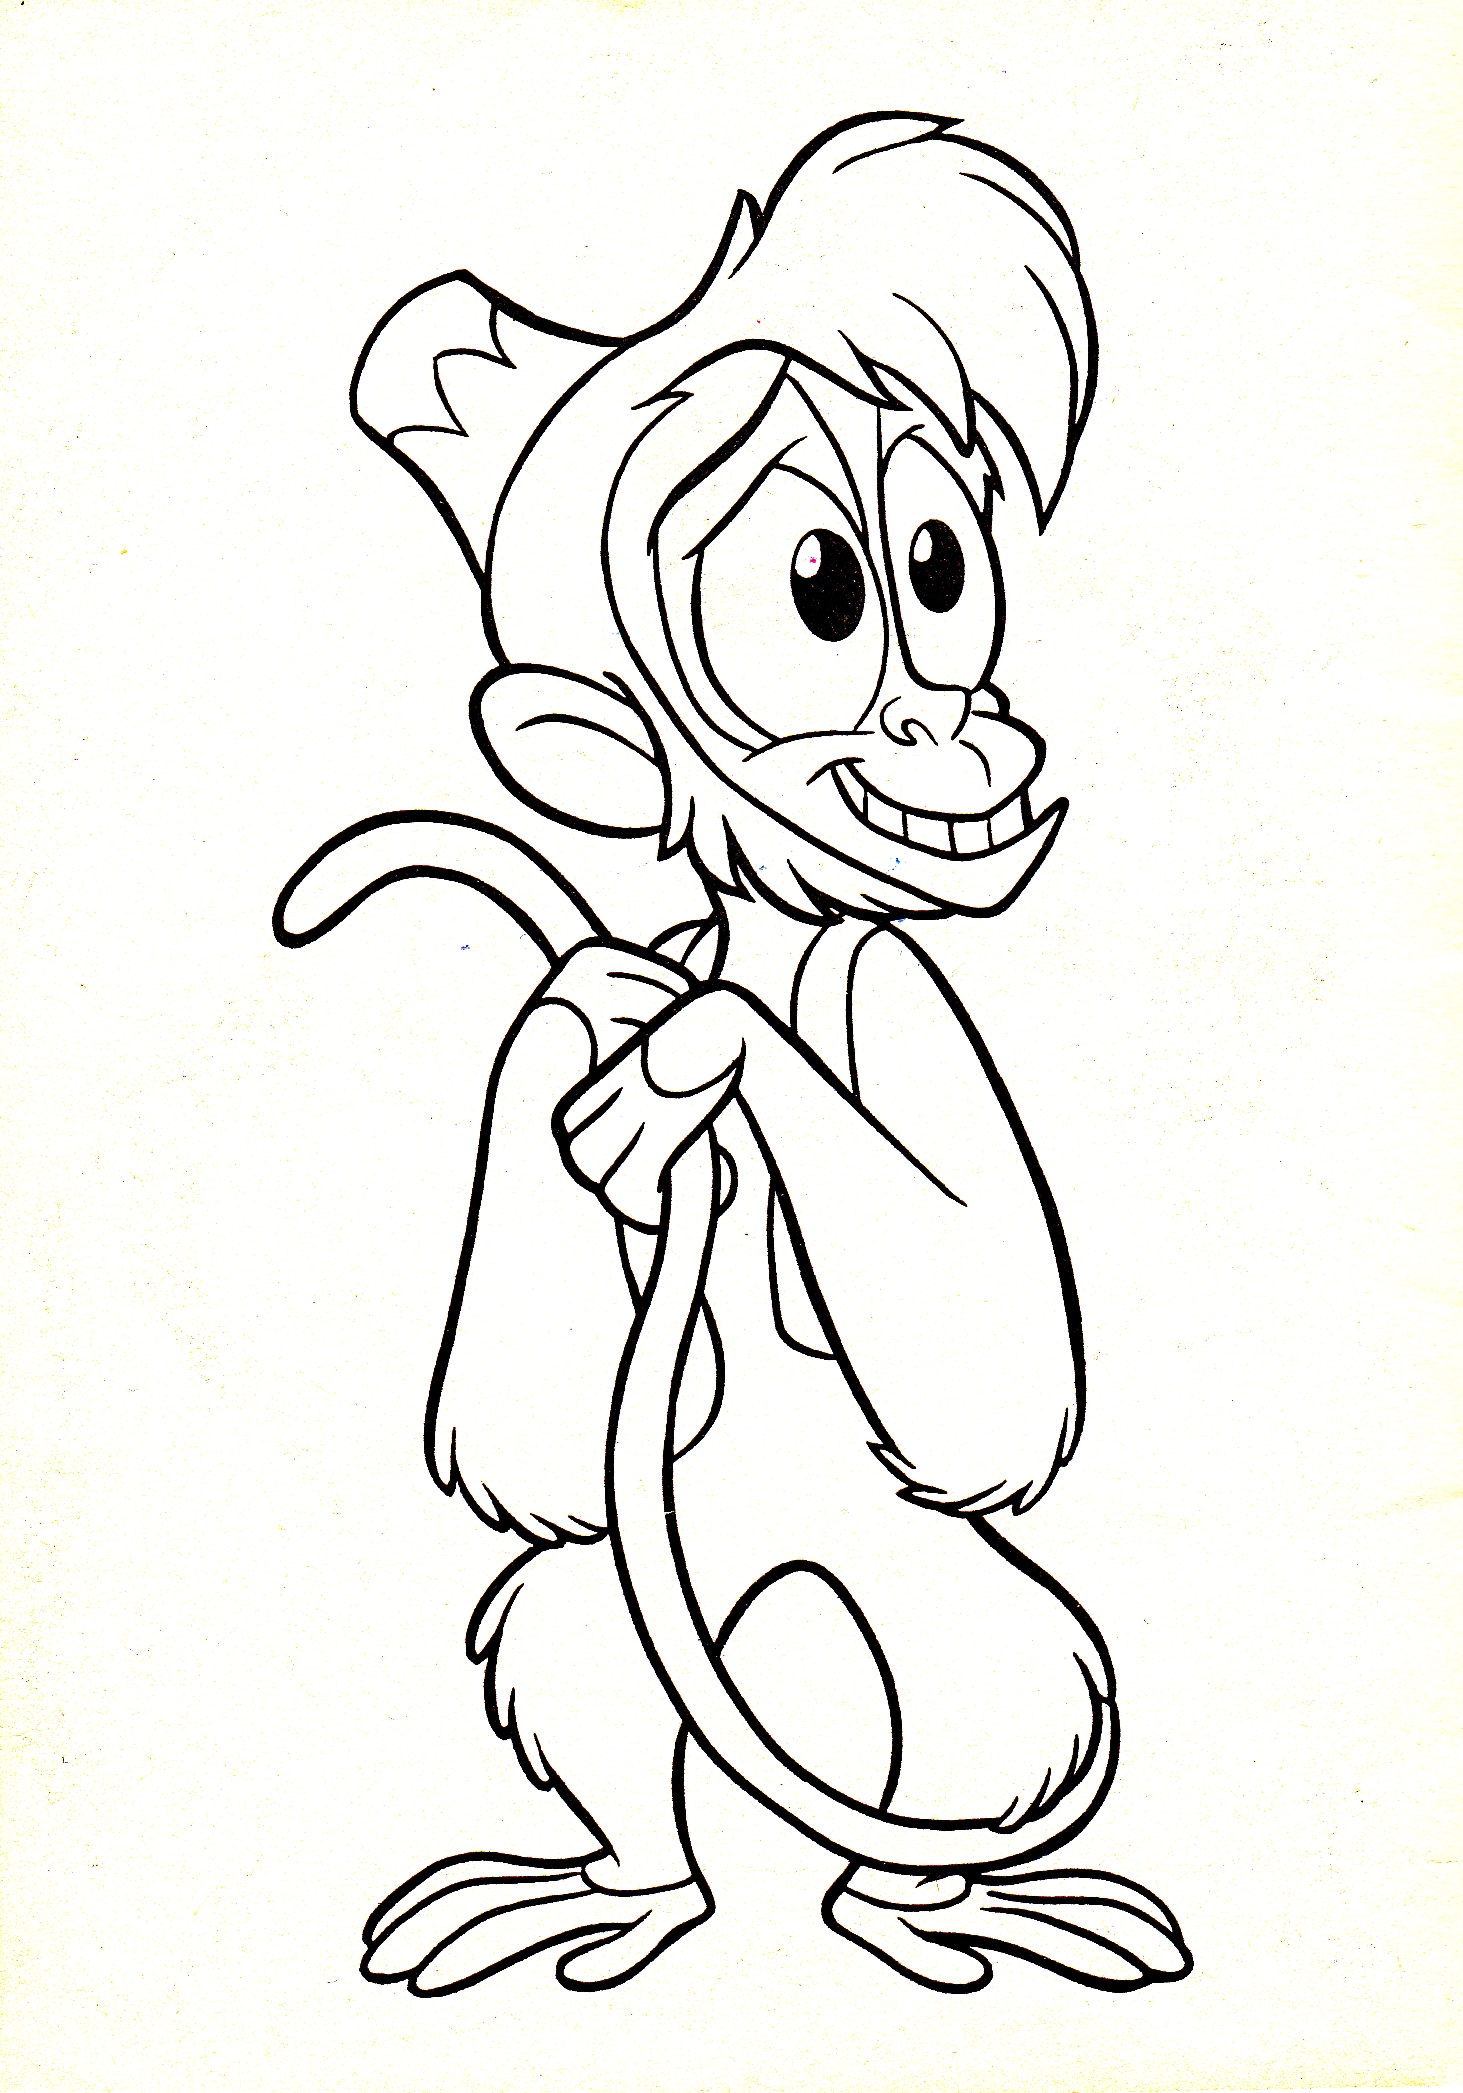 easy-drawing-disney-characters-at-getdrawings-free-download